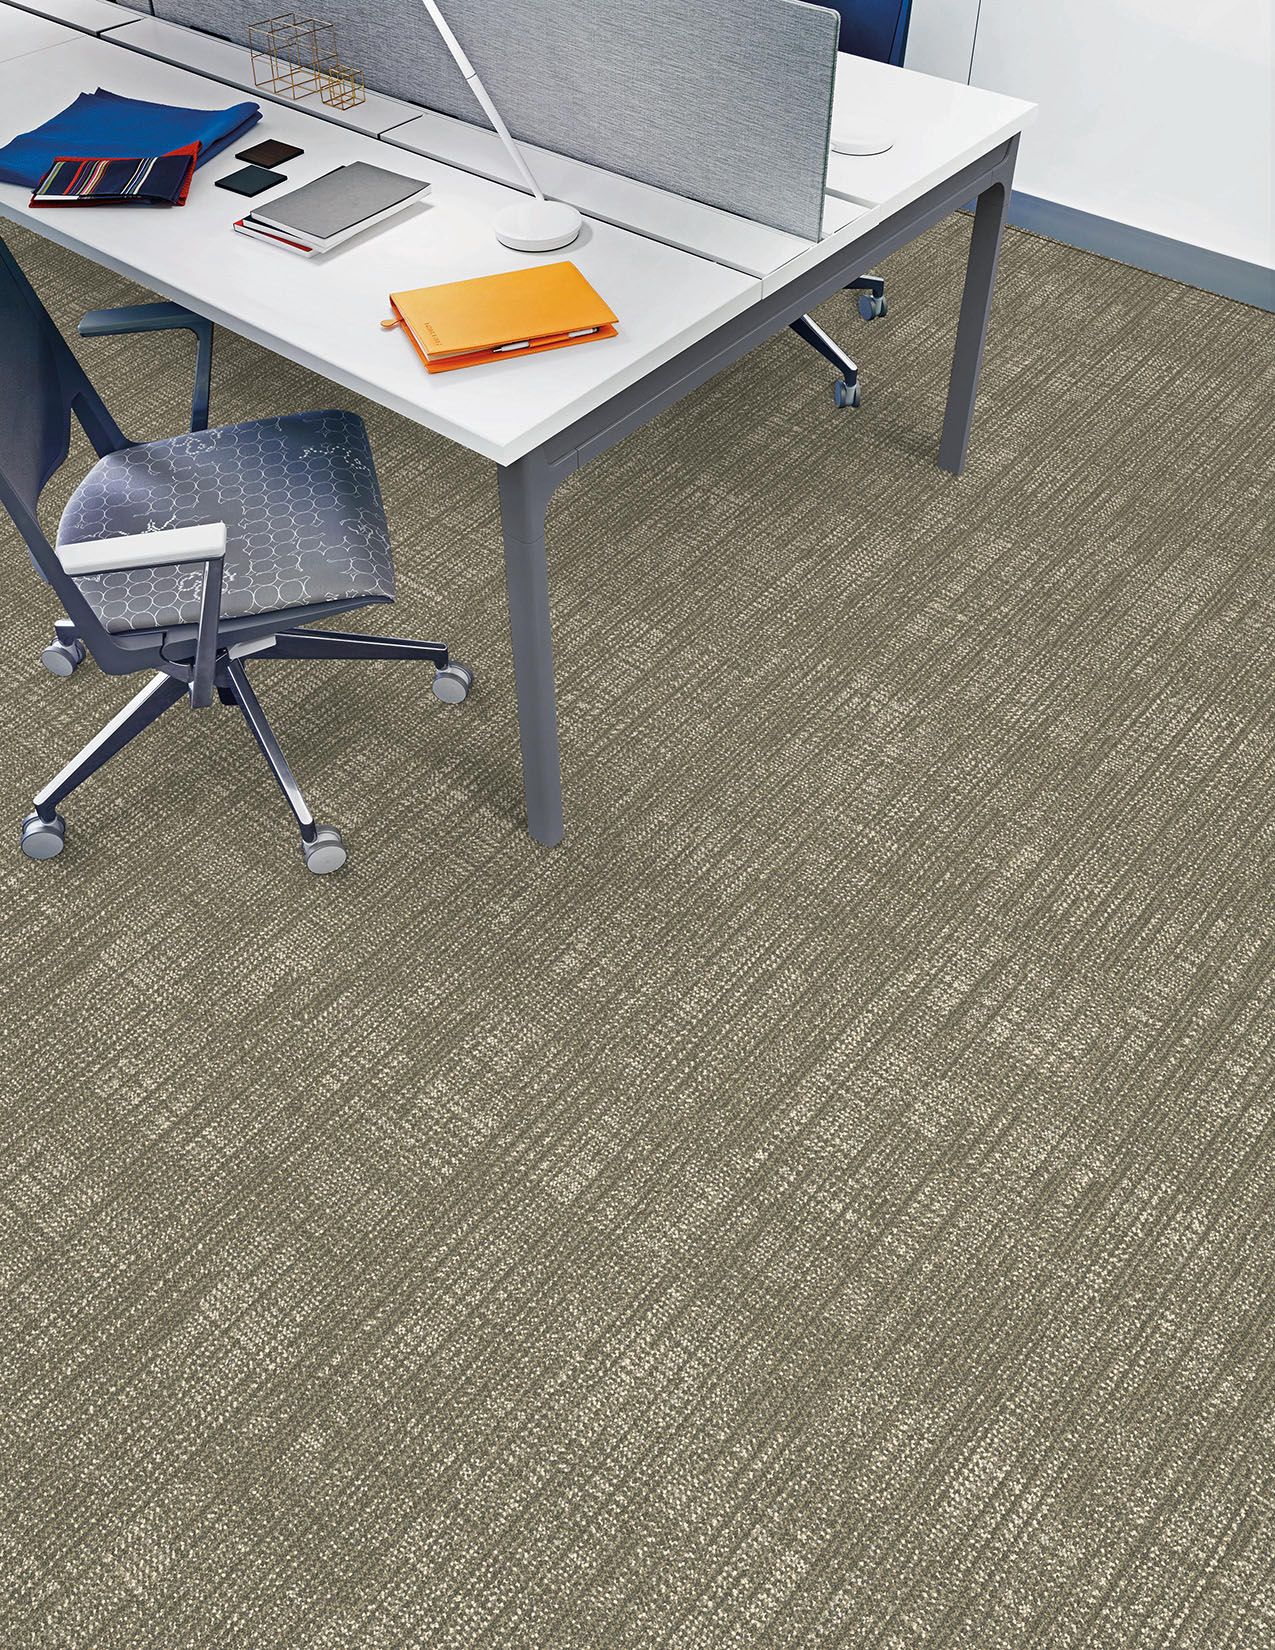 Interface Screen Print plank carpet tile in office with chair and desk numéro d’image 7